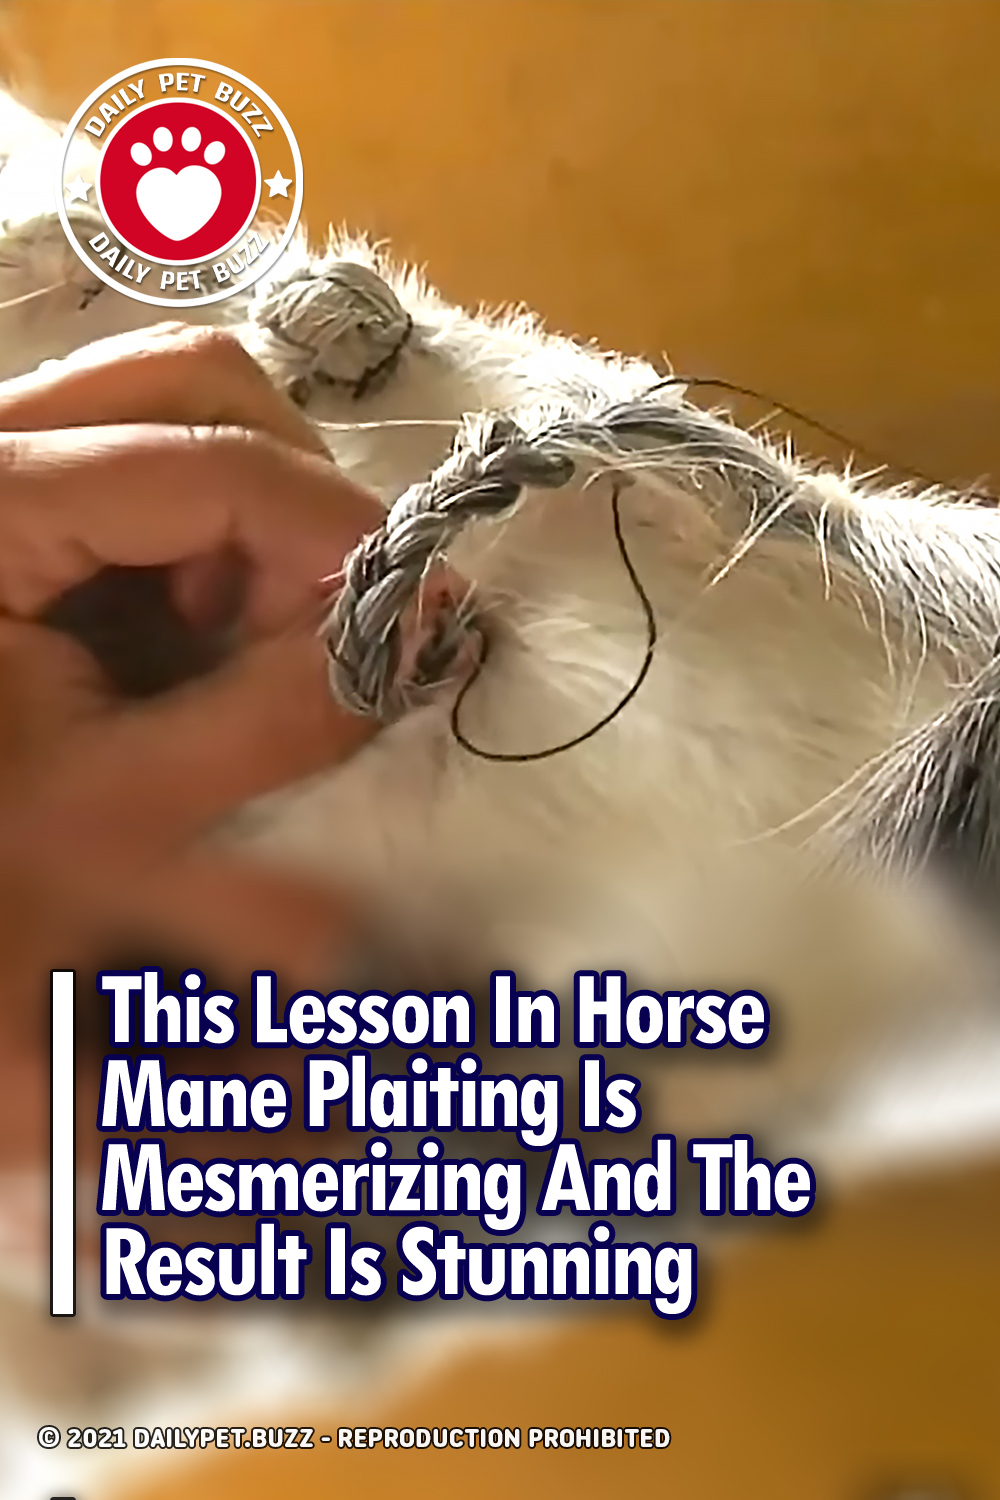 This Lesson In Horse Mane Plaiting Is Mesmerizing And The Result Is Stunning